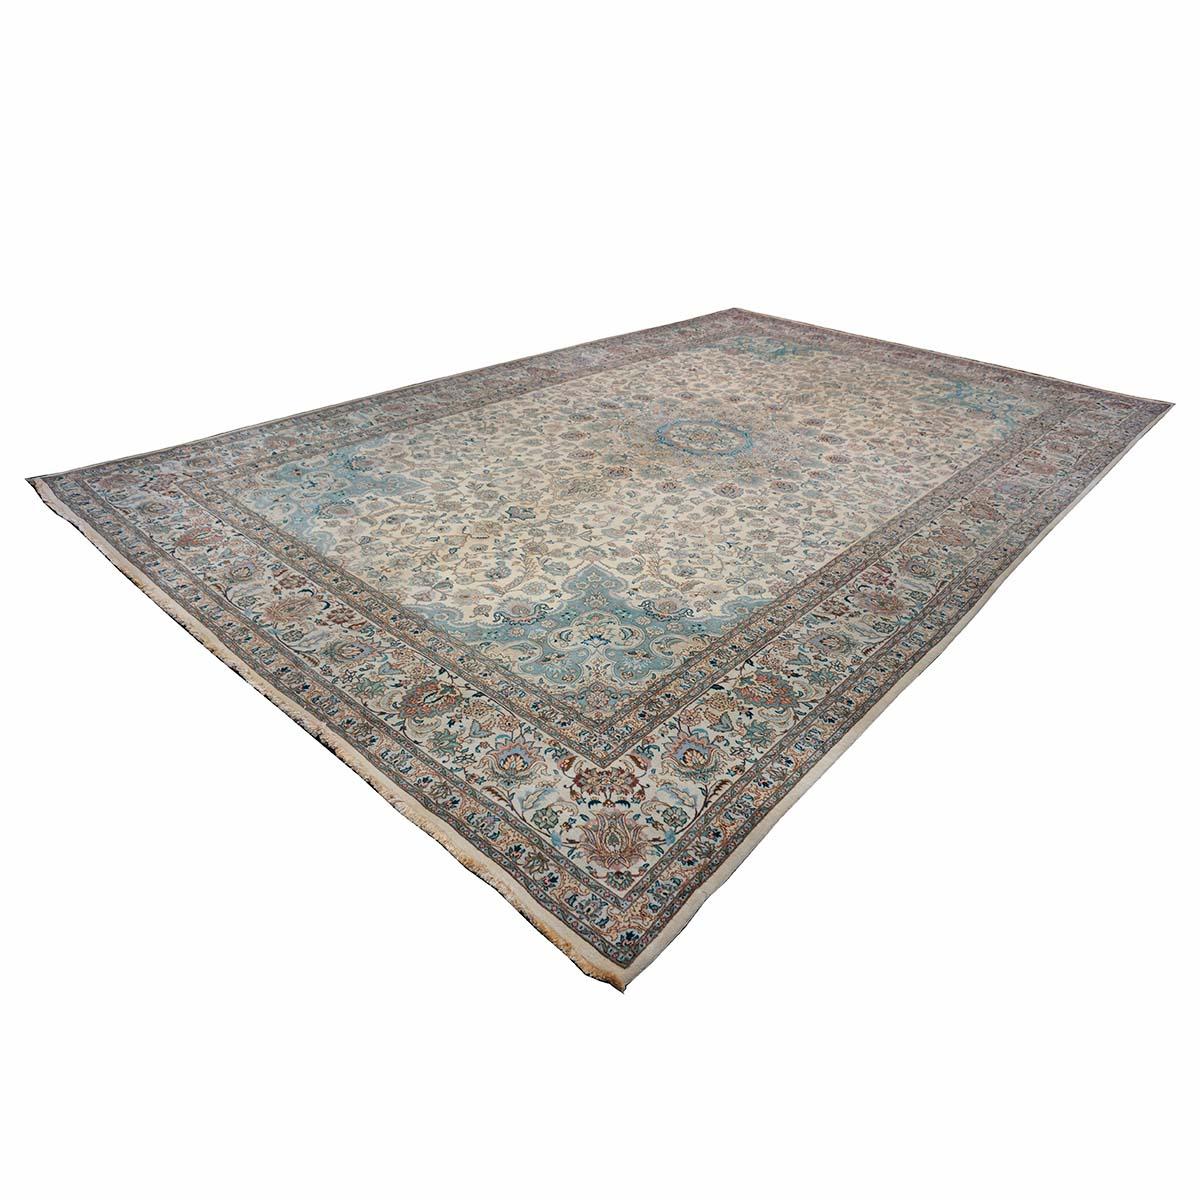 Antique 1940s Persian Tabriz Pahlavi 11x18 Ivory & Blue Handmade Area Rug In Good Condition For Sale In Houston, TX